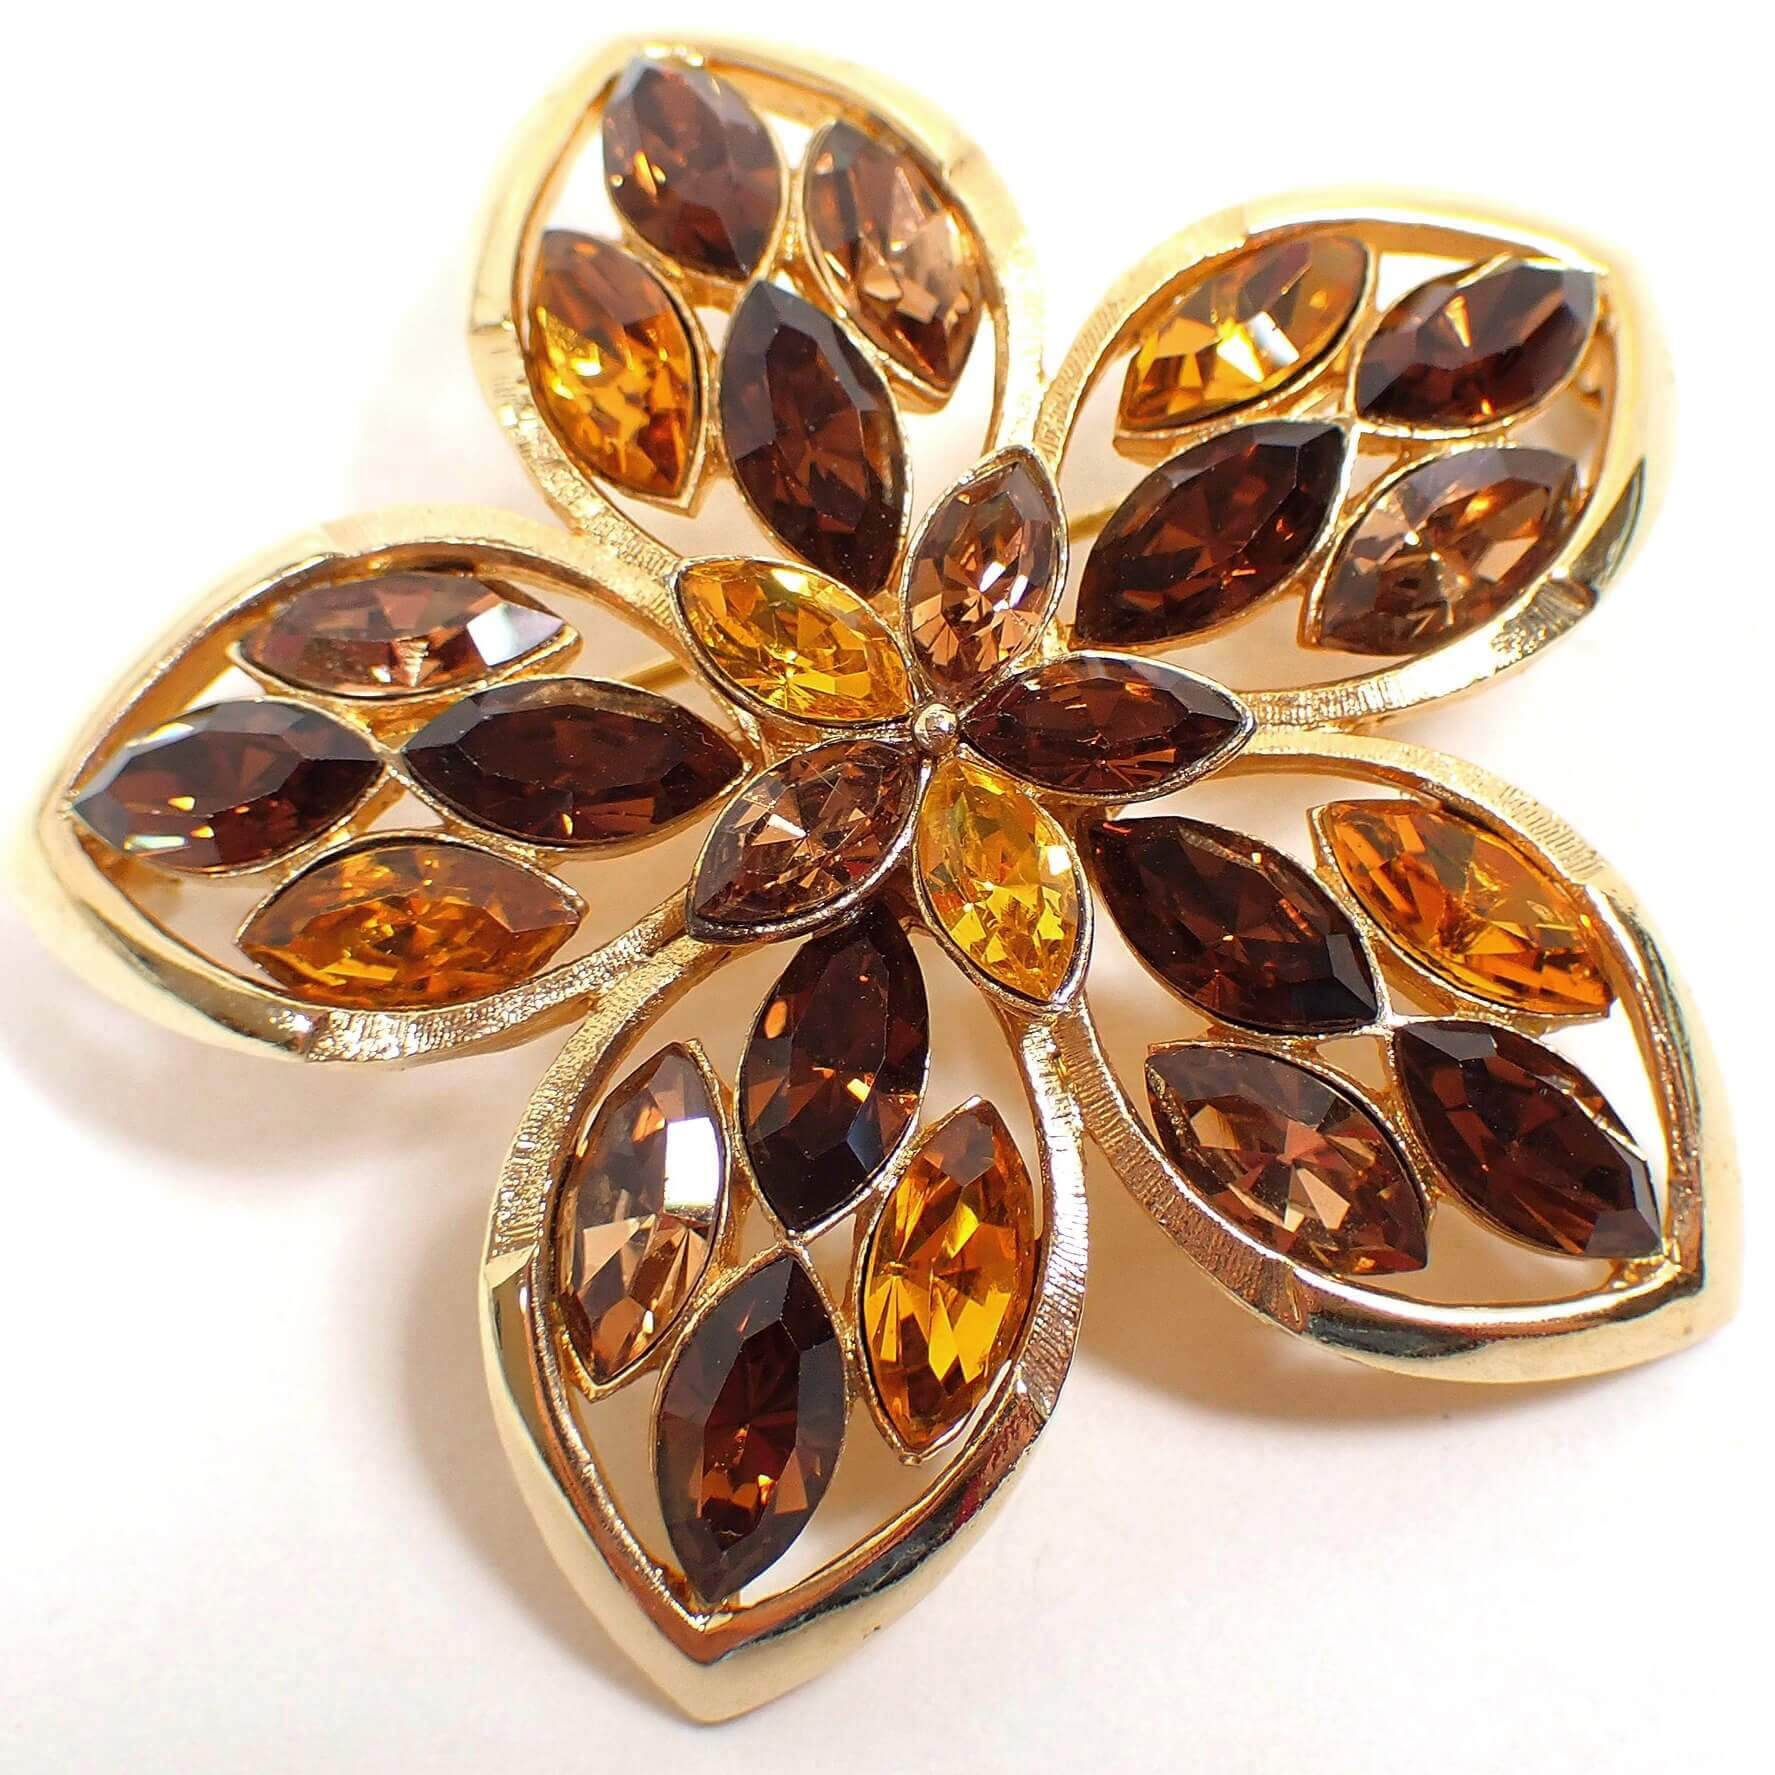 Angled front view of the Mid Century vintage rhinestone floral brooch pin. The metal is gold tone plated in color. There are five rounded petals with pointed ends. Each petal and the middle of the flower has marquis shaped rhinestones in brown, orange, and dark yellow color.